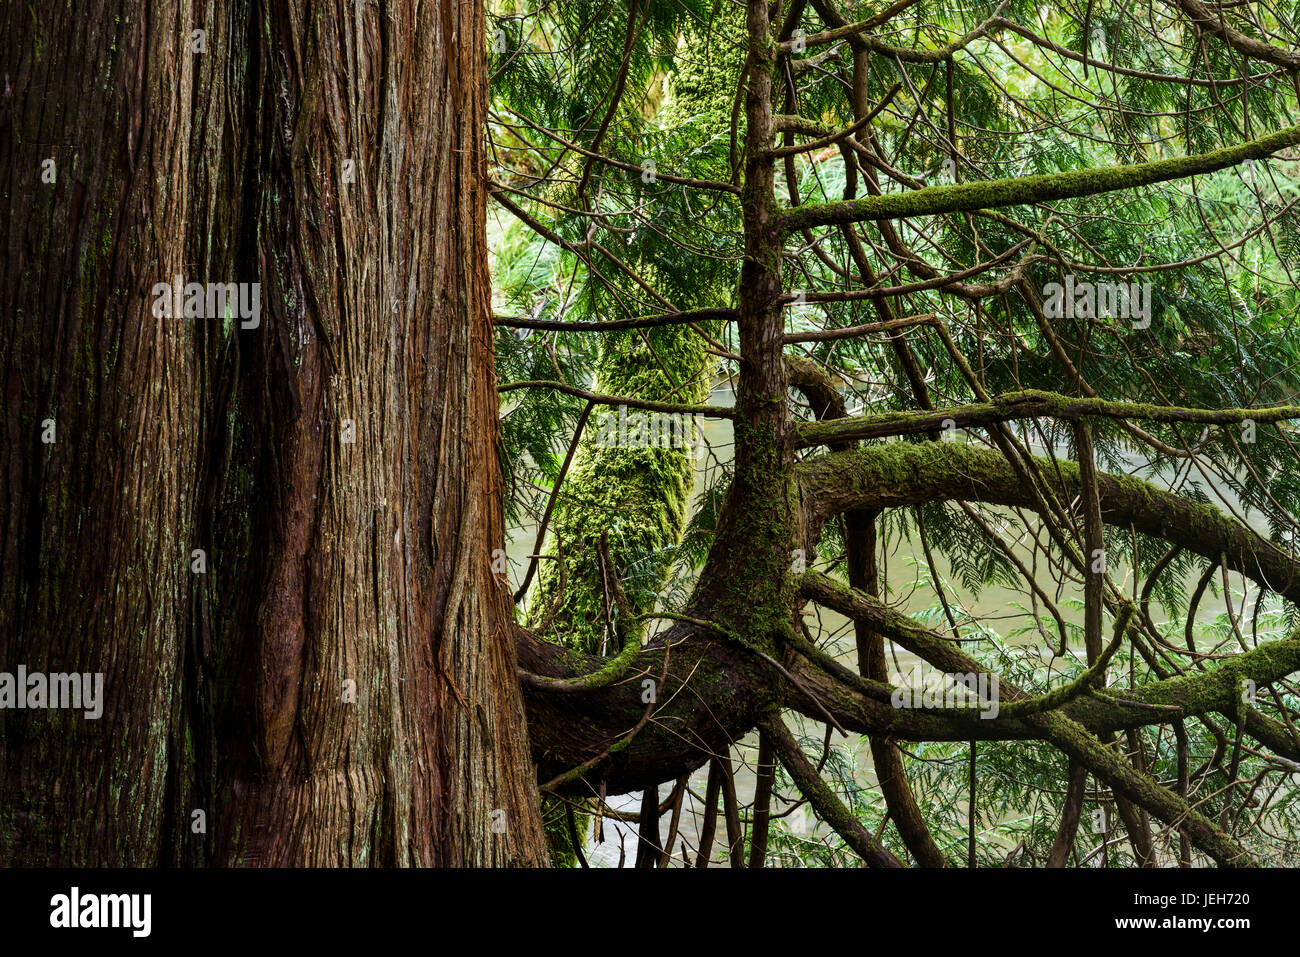 Huge Western Red Cedar trees are found at Ecola Creek Forest Reserve; Cannon Beach, Oregon, United States of America Stock Photo